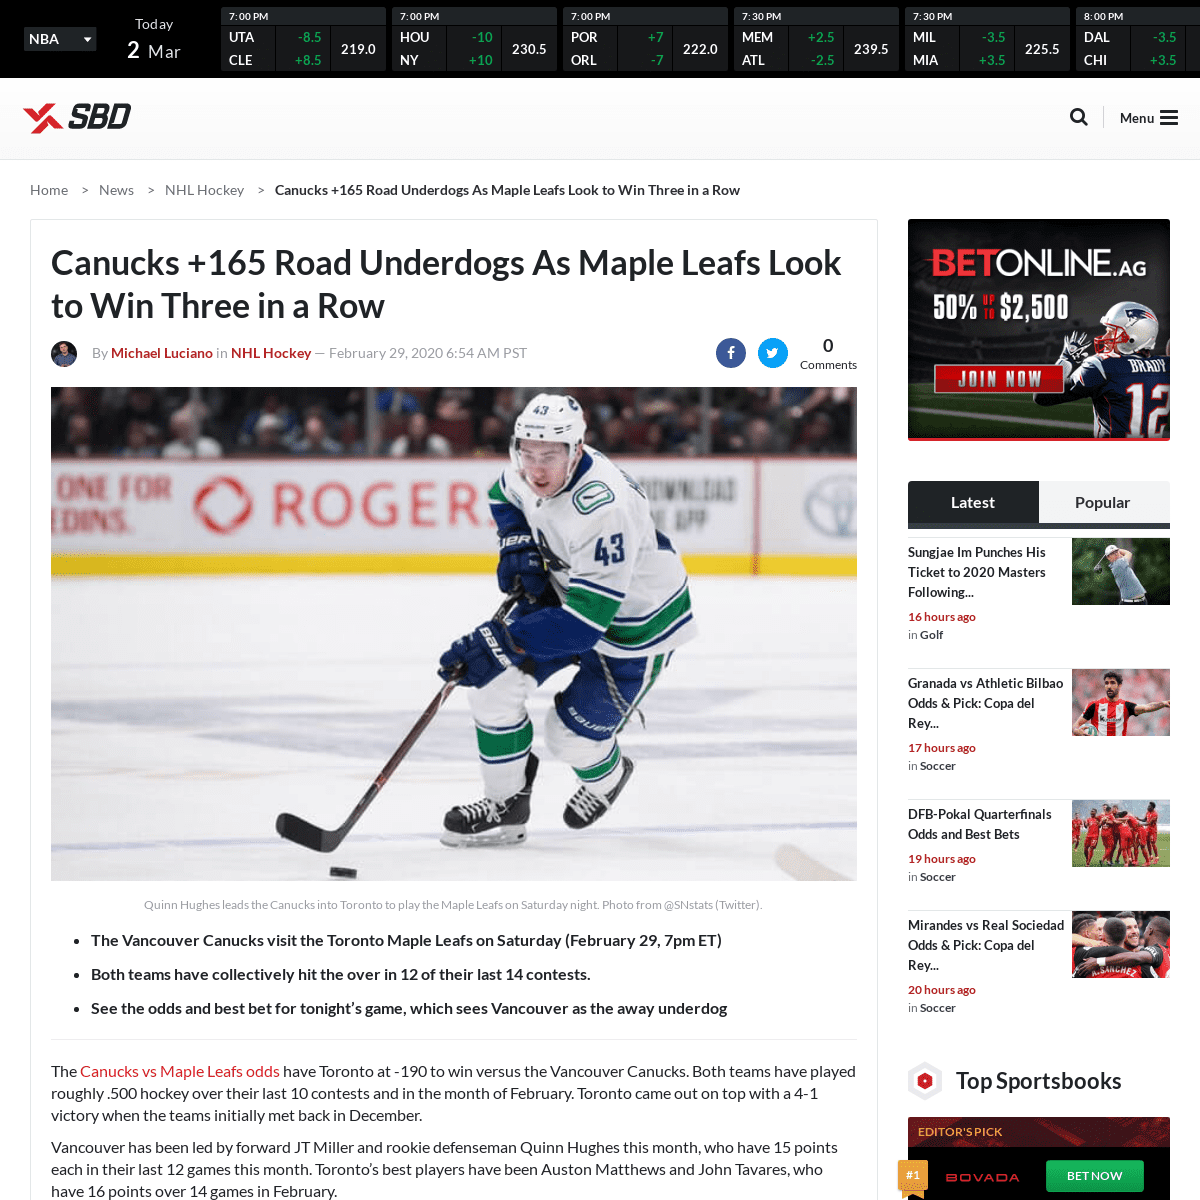 A complete backup of www.sportsbettingdime.com/news/nhl/canucks-underdogs-maple-leafs-odds-preview/